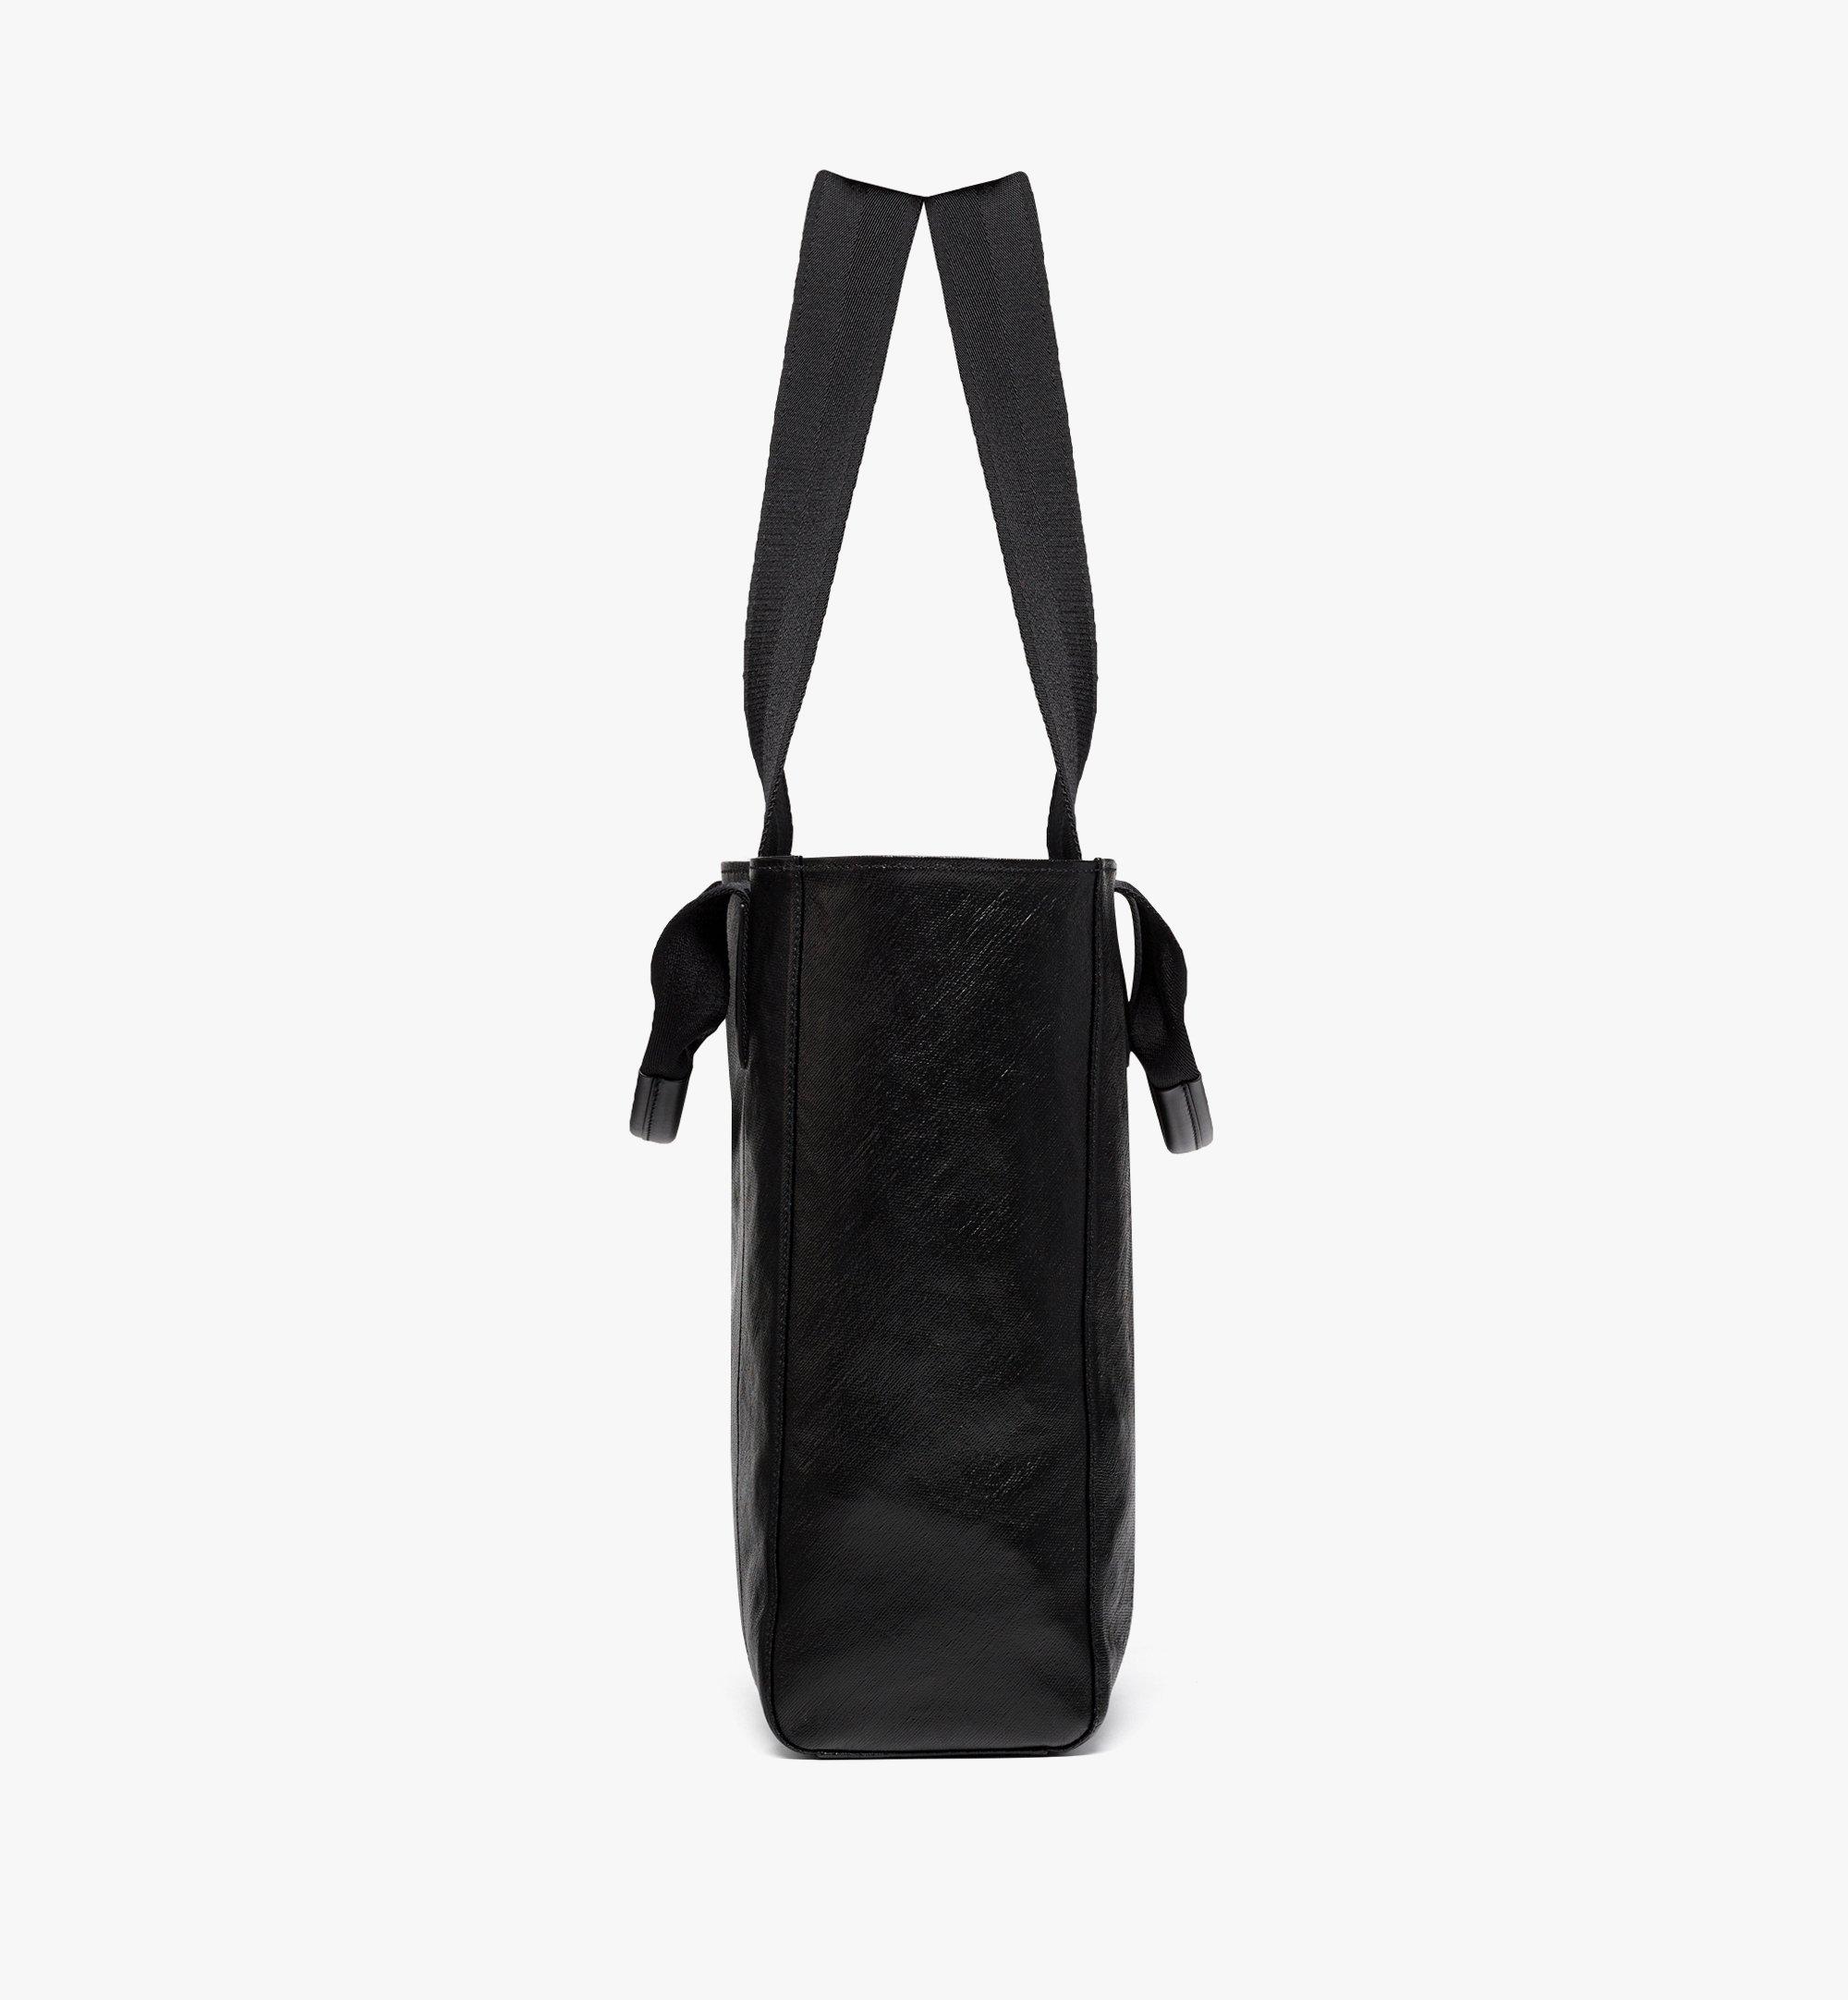 Large Reversible Diamond Tote in Canvas Leather Mix Black | MCM ®US